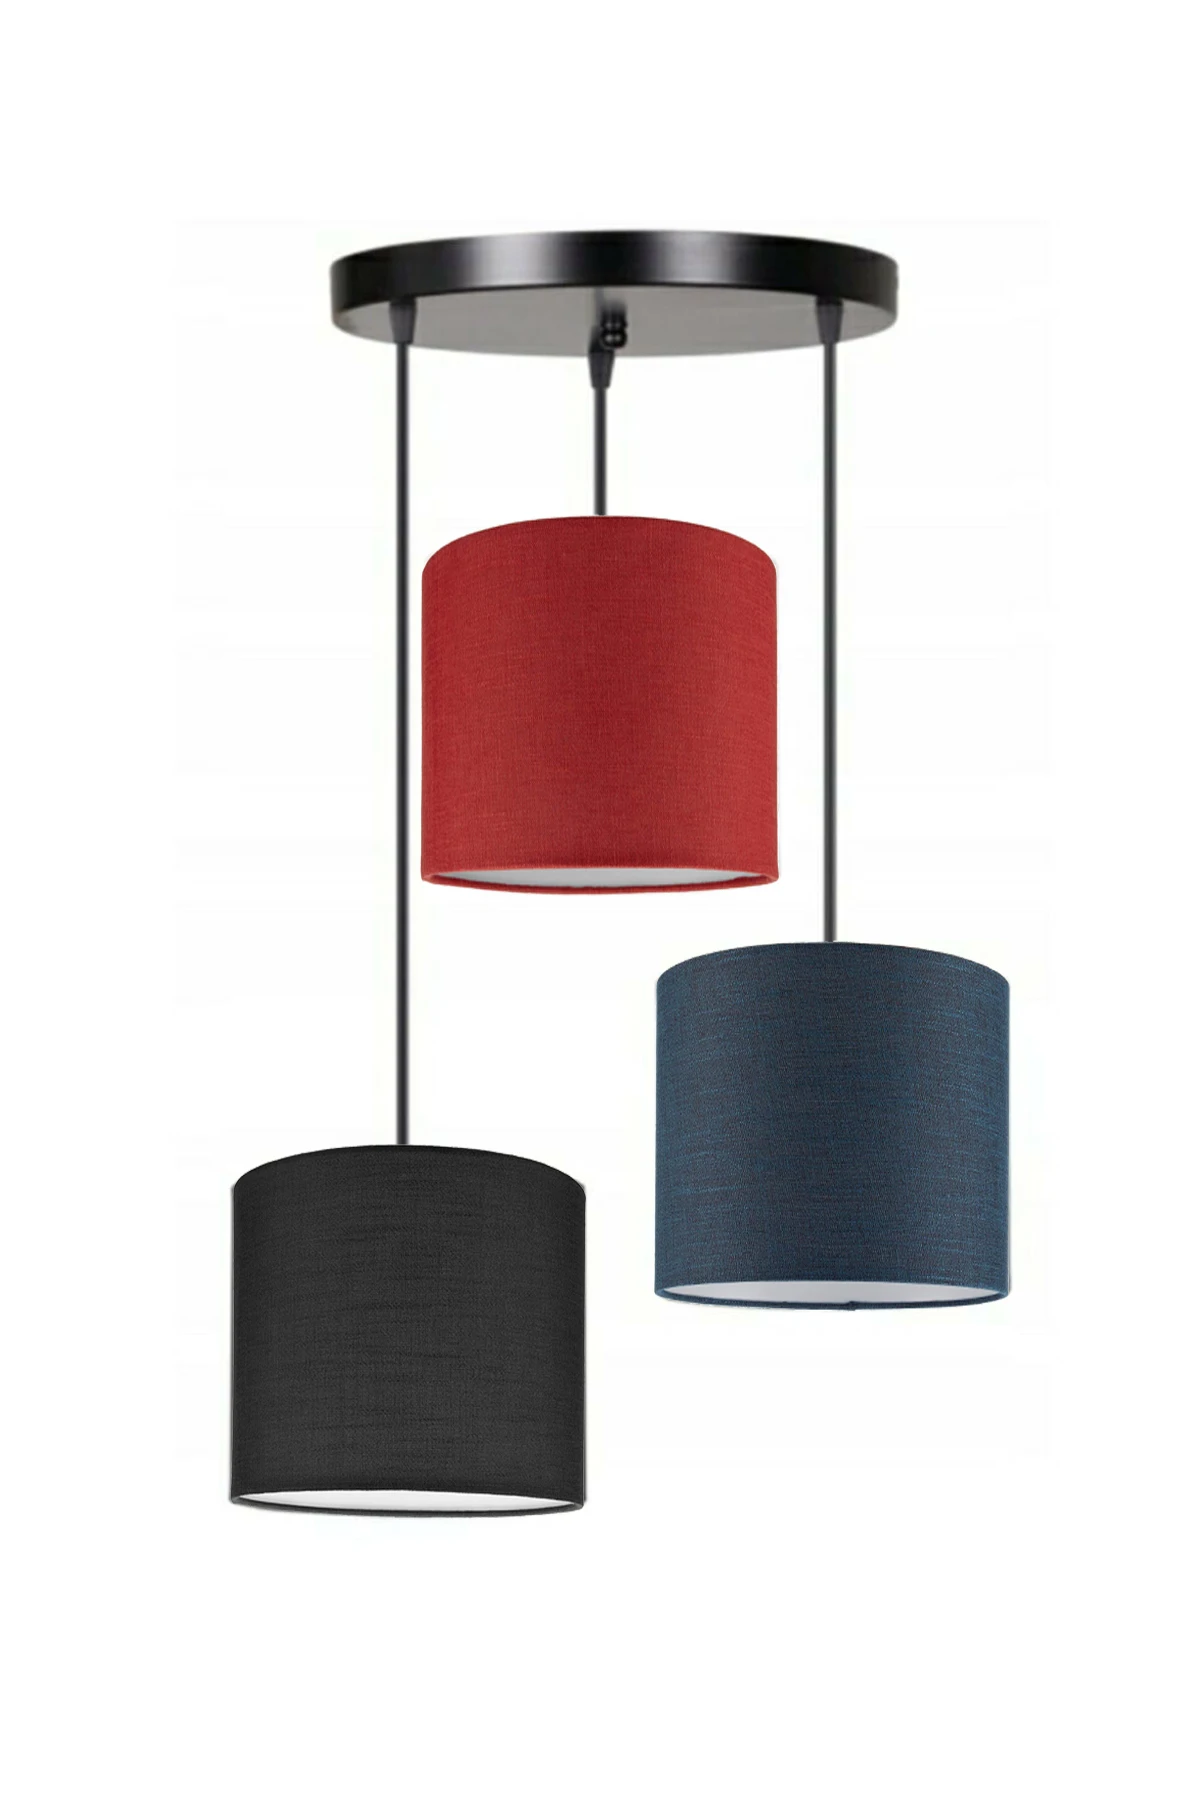 3 Heads Black Red Navy Blue Cylinder Fabric Lampshade Pendant Lamp Chandelier Modern Decorative Design For Home Hotel Office Use